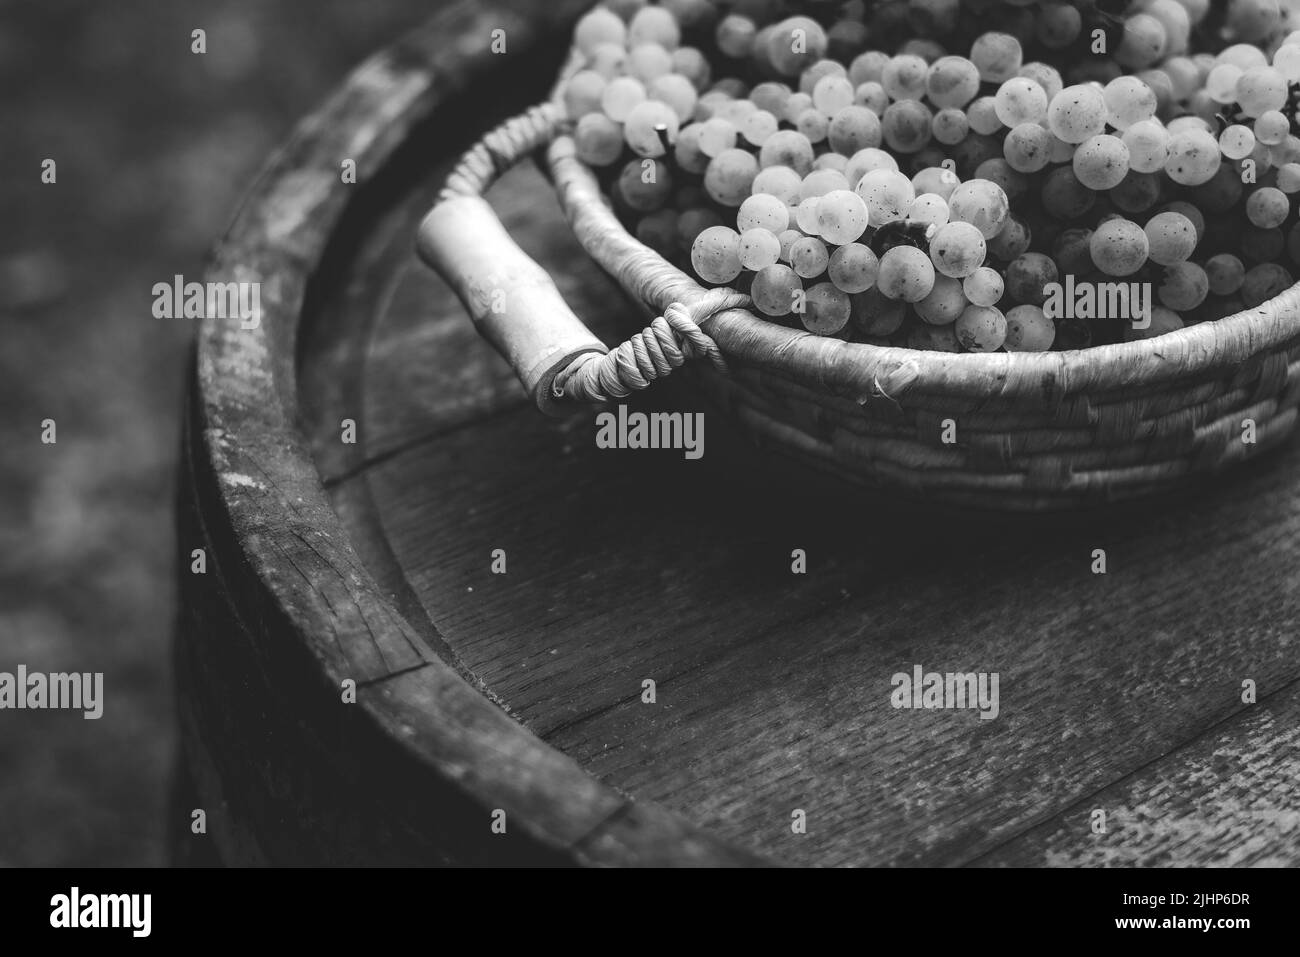 Grapes on the basket on the wooden barrel Stock Photo